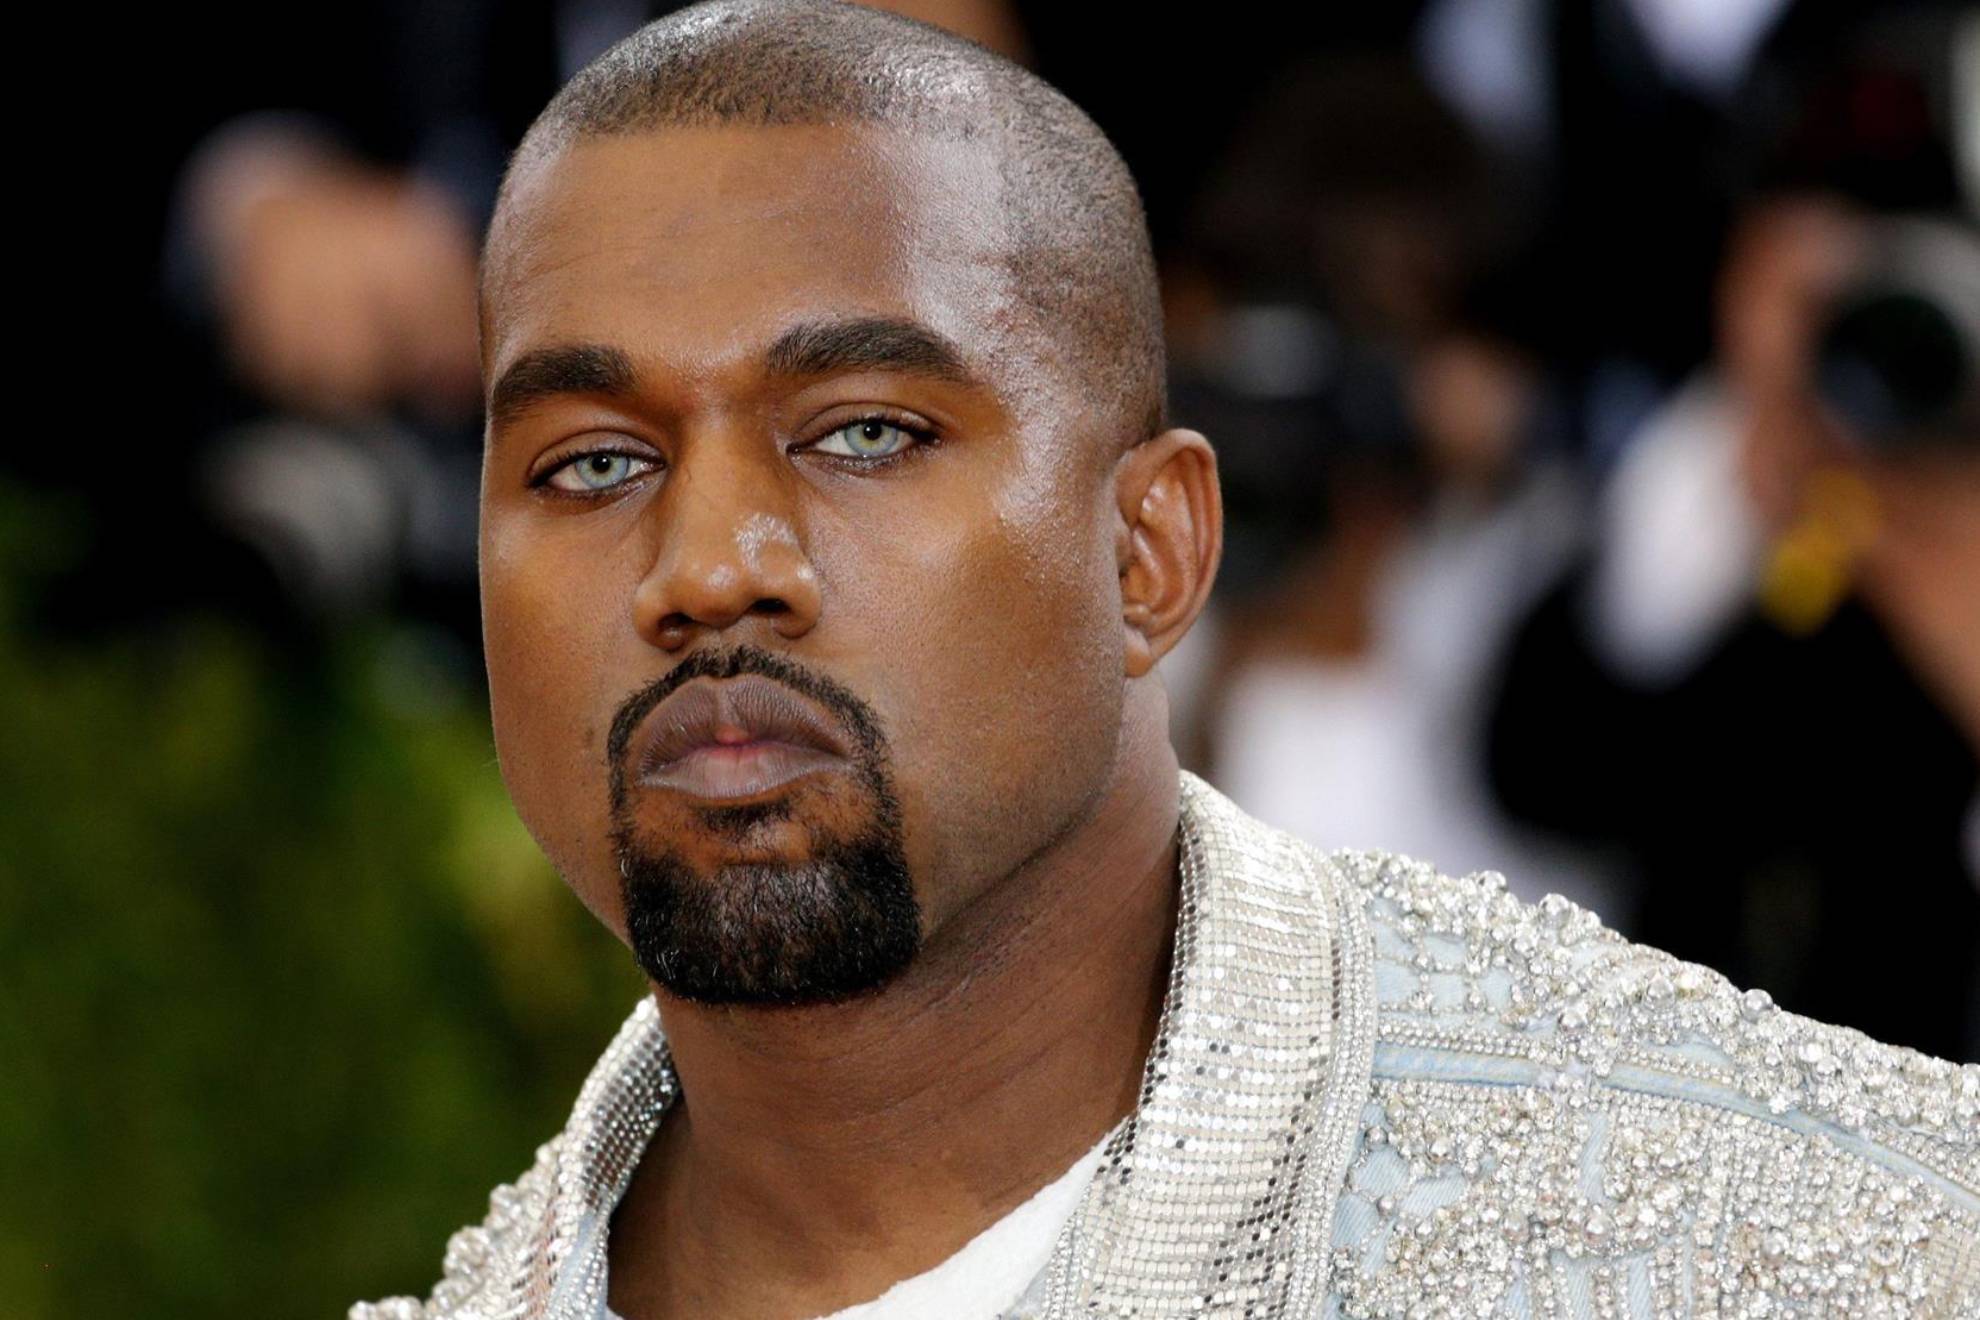 Kanye West 'dropped' by more brands after his controversial statements